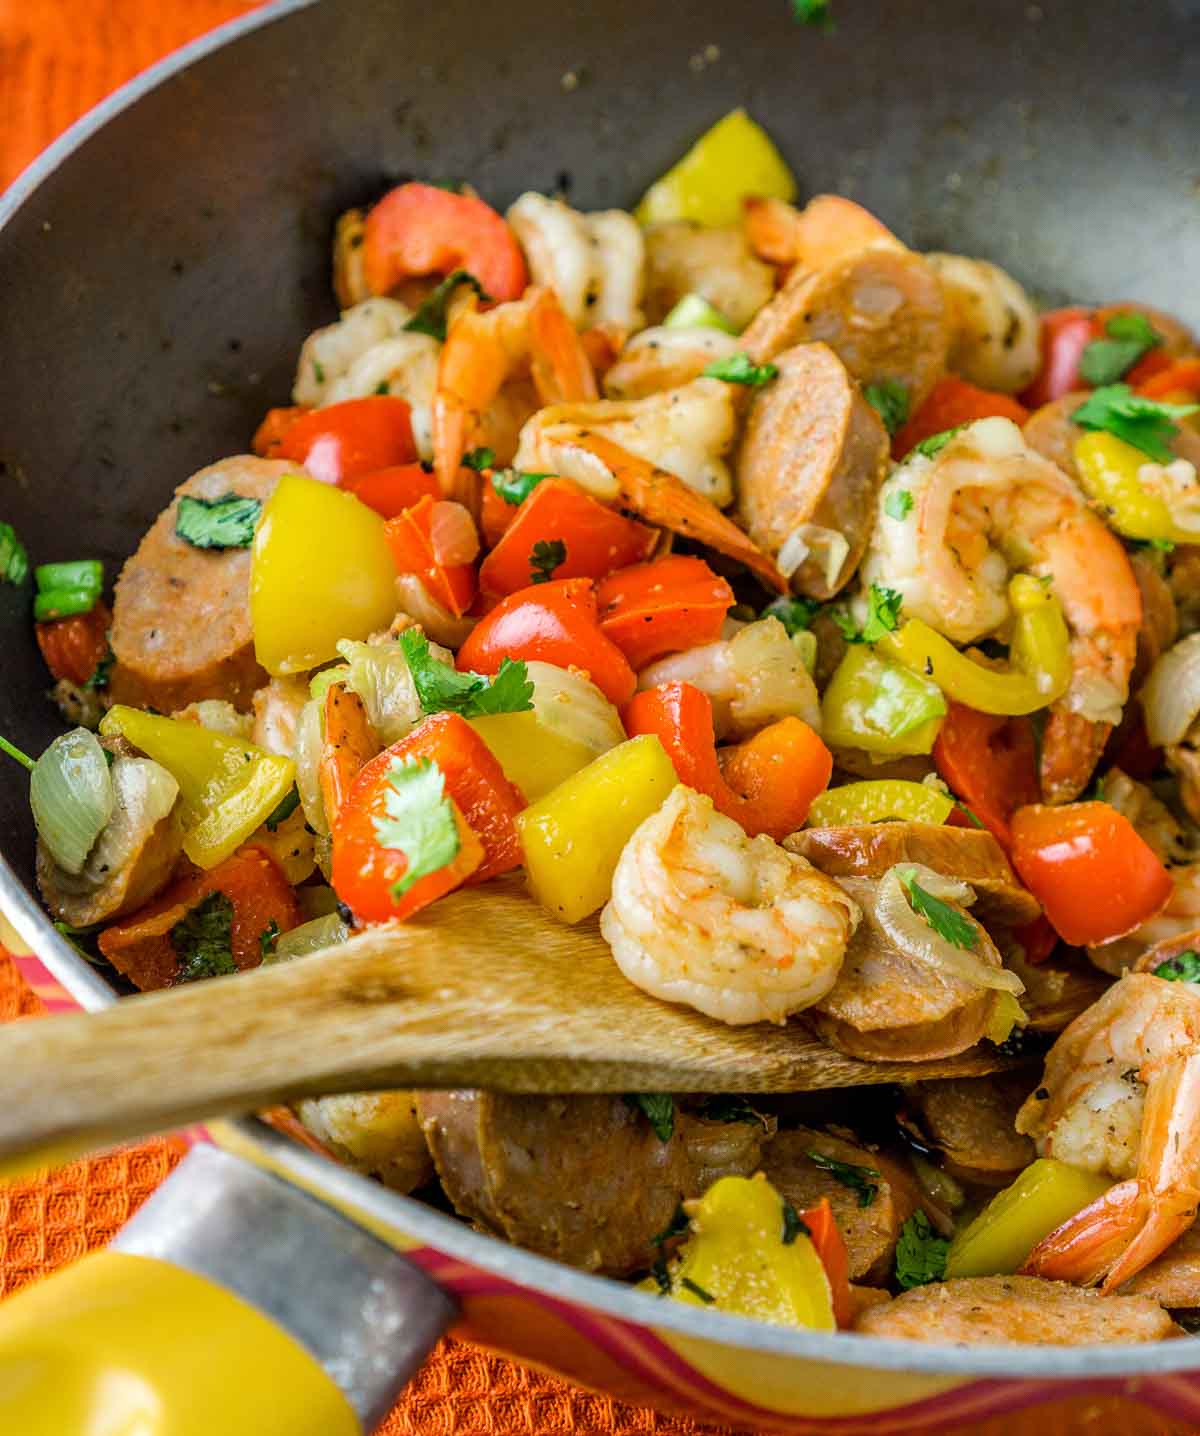 Spatula in a pan with cooked Italian sausage and shrimp